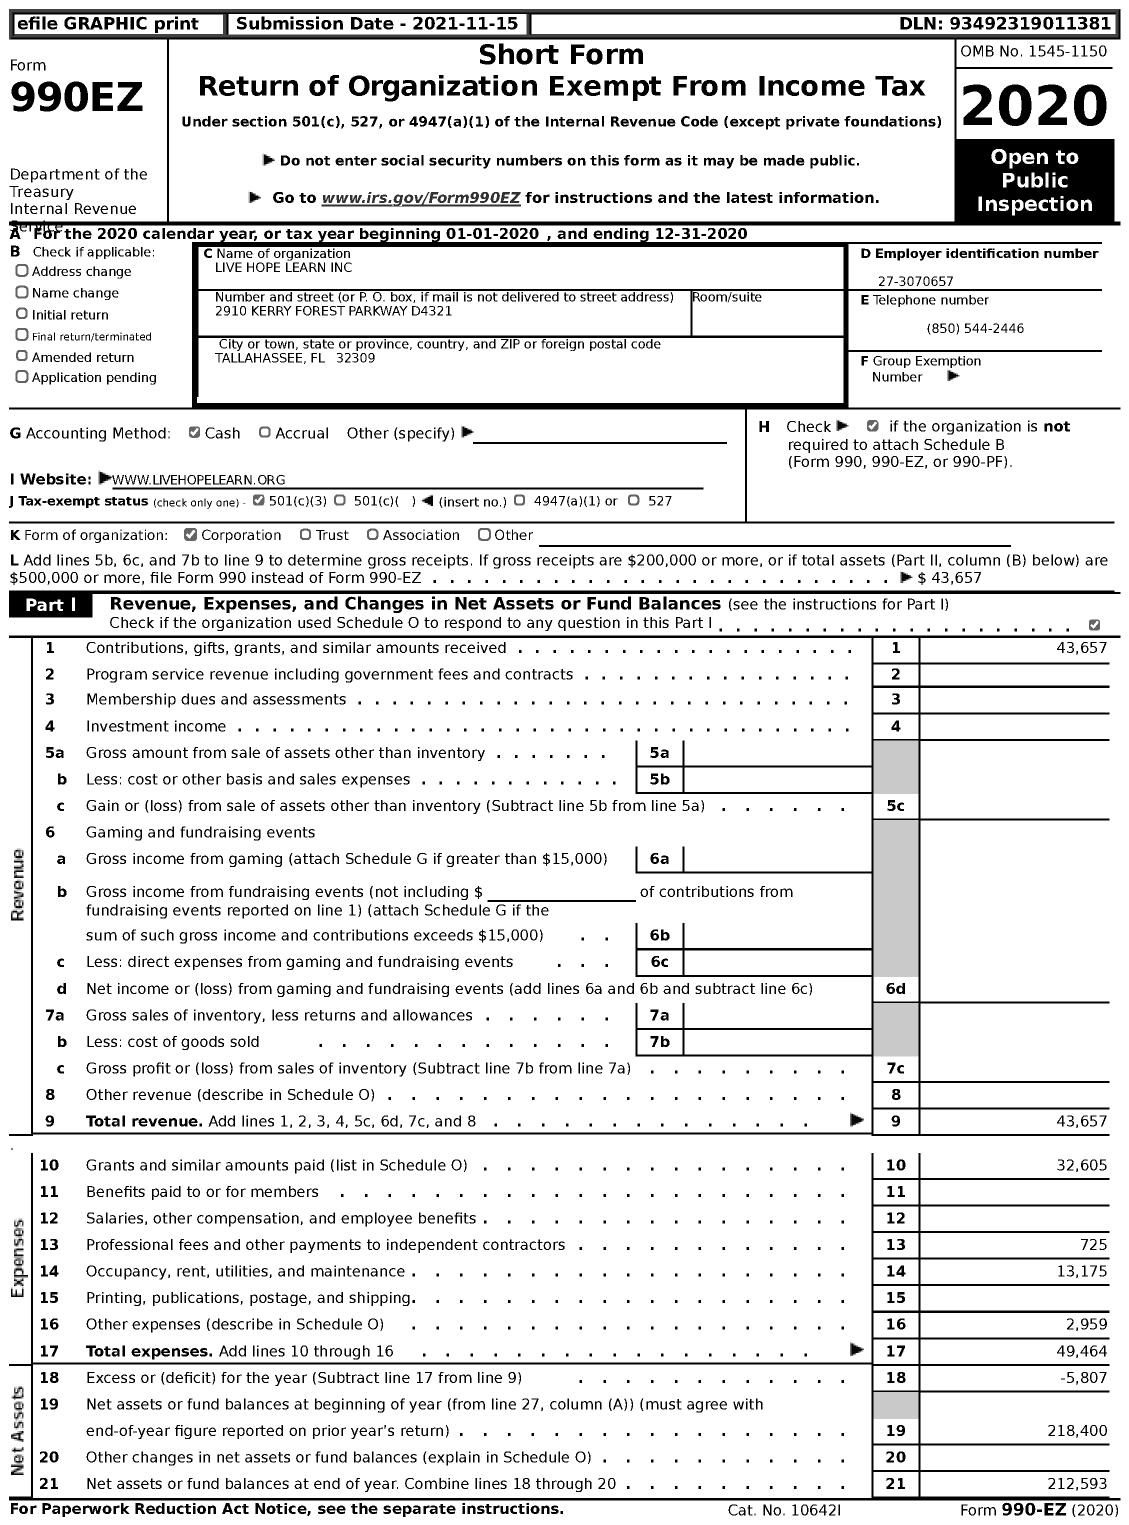 Image of first page of 2020 Form 990EZ for Live Hope Learn